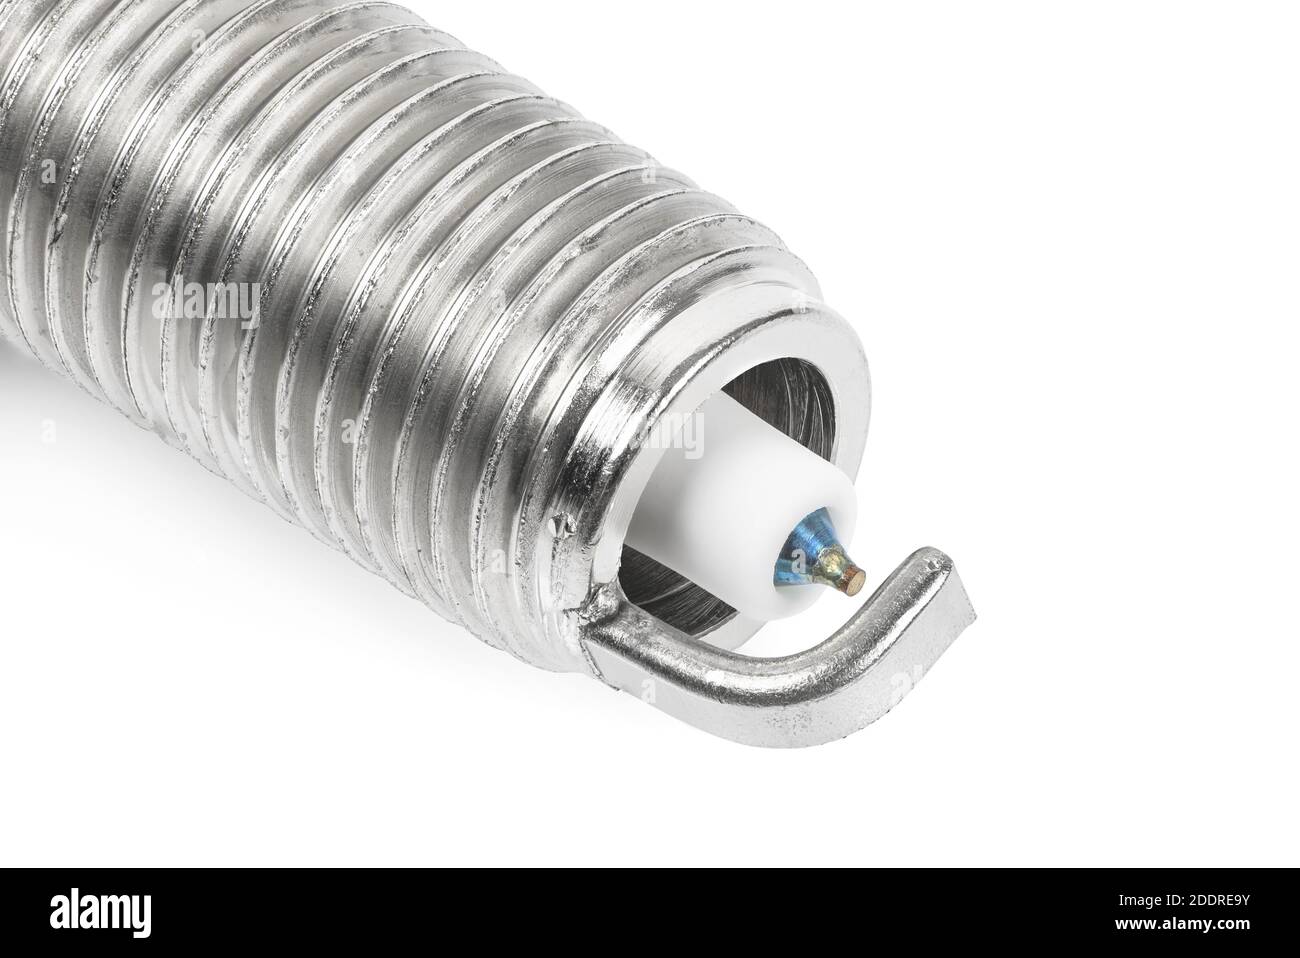 Closeup of car iridium spark plug isolated on white background with clipping path Stock Photo